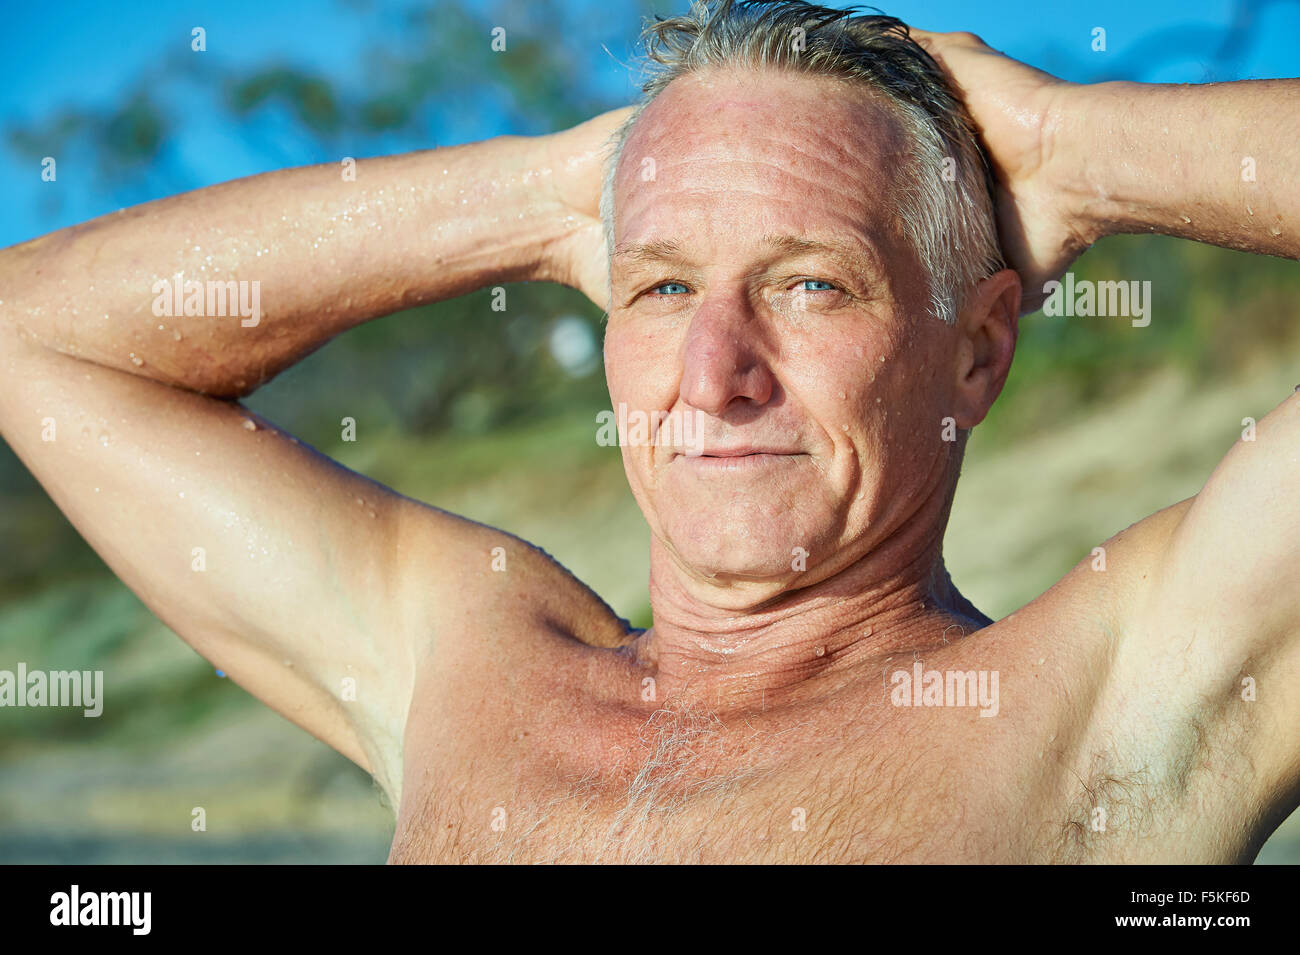 Portrait of a mature aged man after a swim in the ocean. Water droplets are running down his face,shoulders and arms. Stock Photo